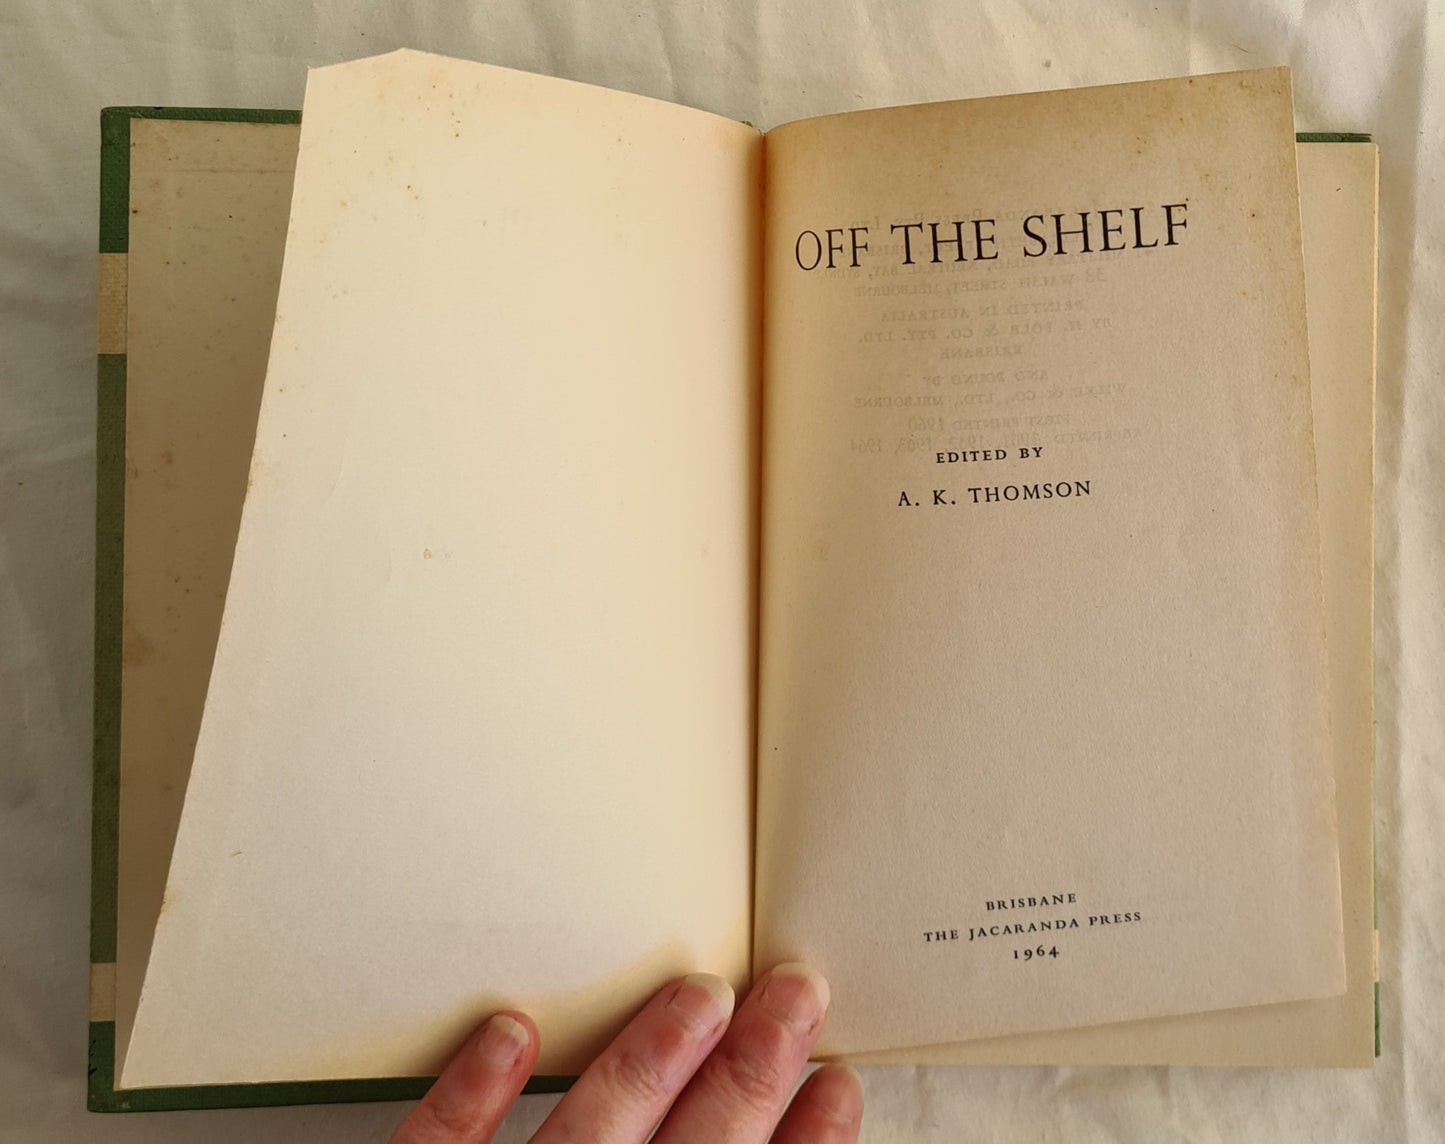 Off the Shelf by A. K. Thomson